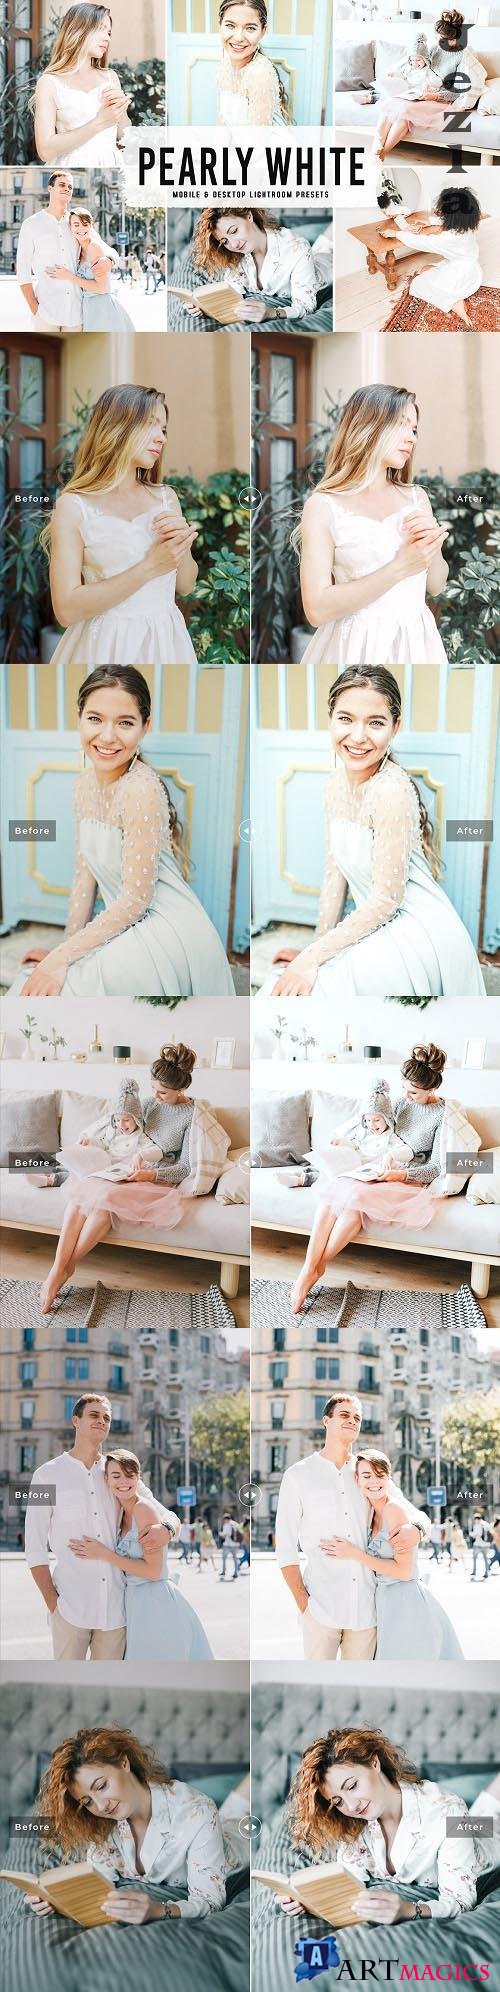 Pearly White Pro Lightroom Presets - 6346201